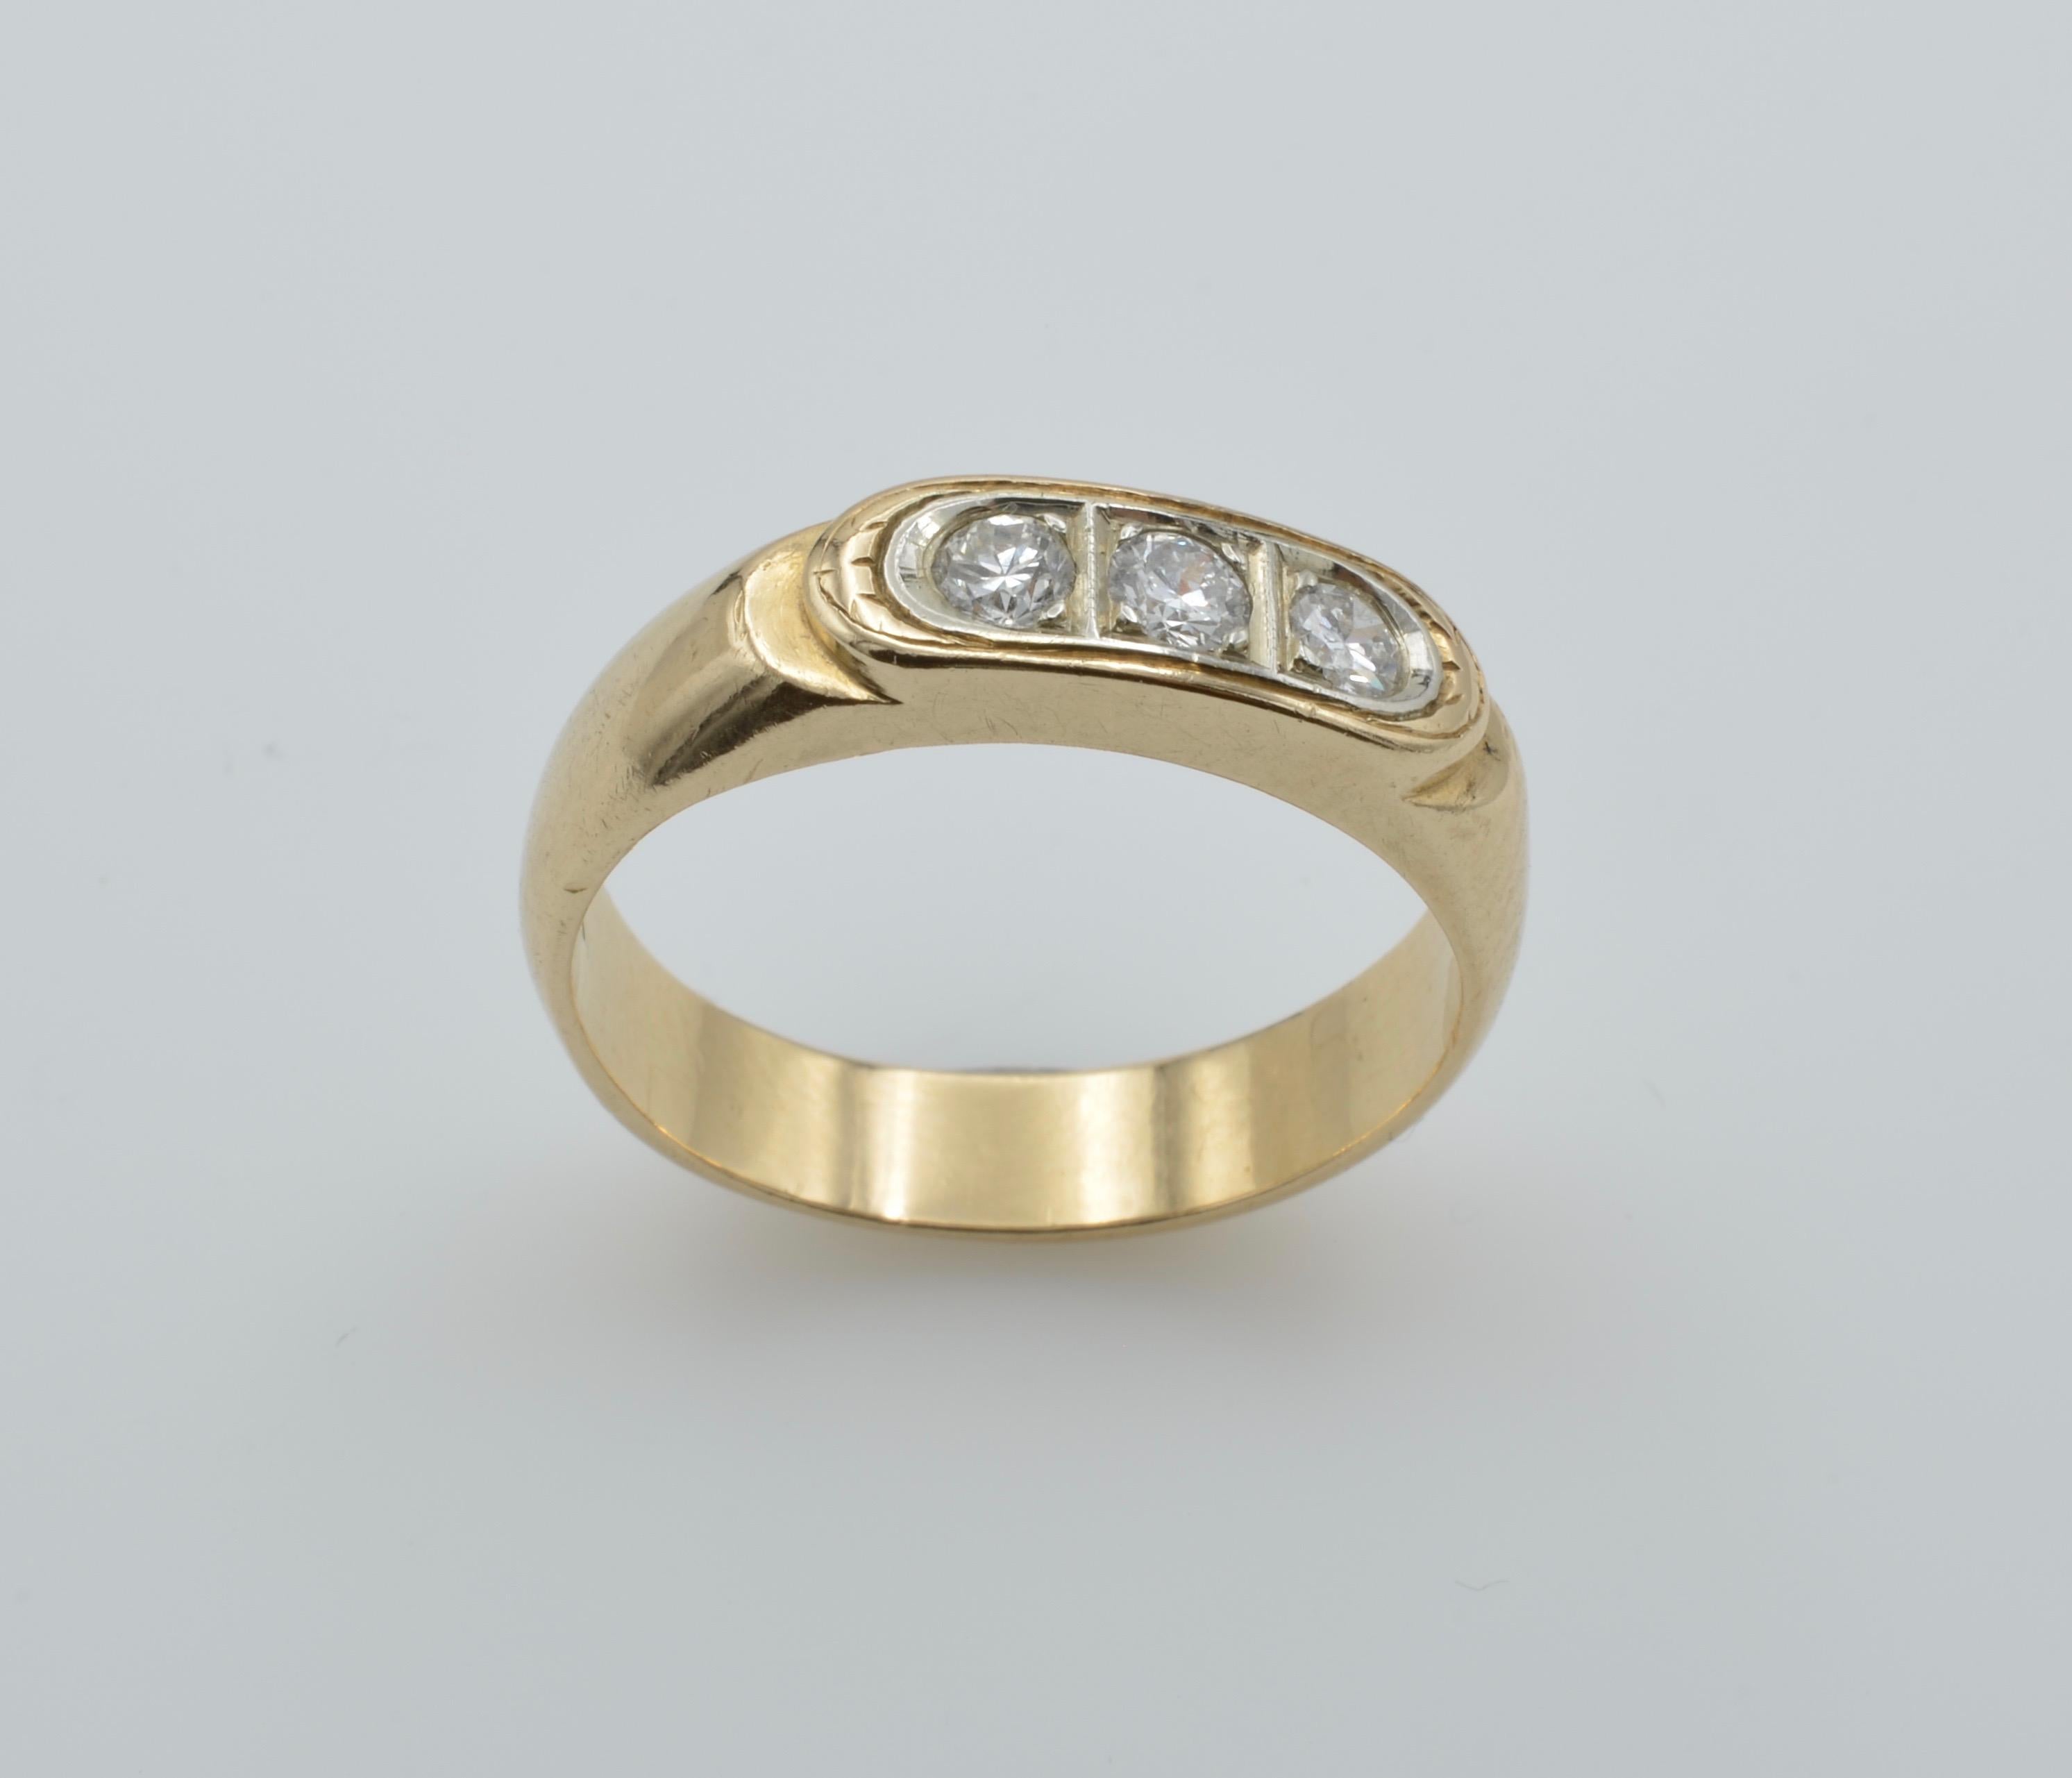 3 Diamond Mens 14 Karat Gold Ring 1970 In Excellent Condition For Sale In Berkeley, CA